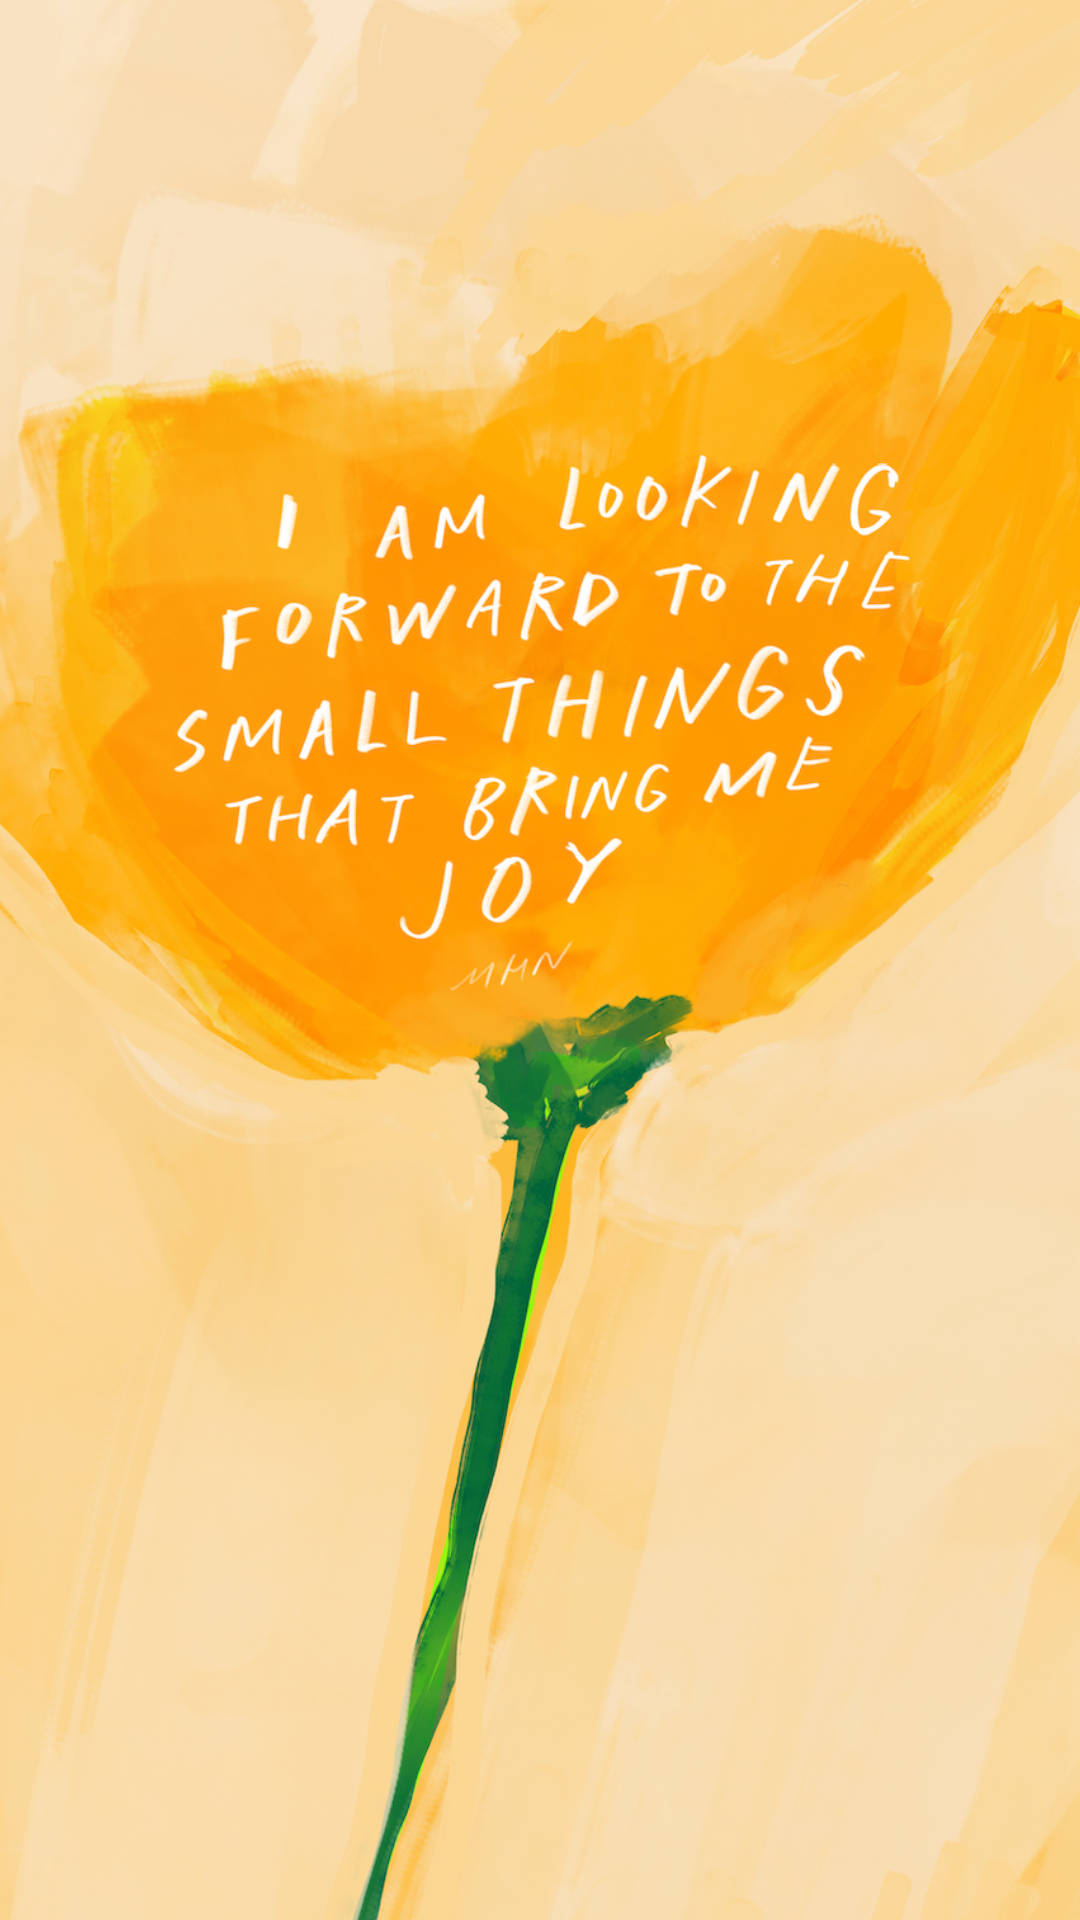 Small Things Joy Affirmation